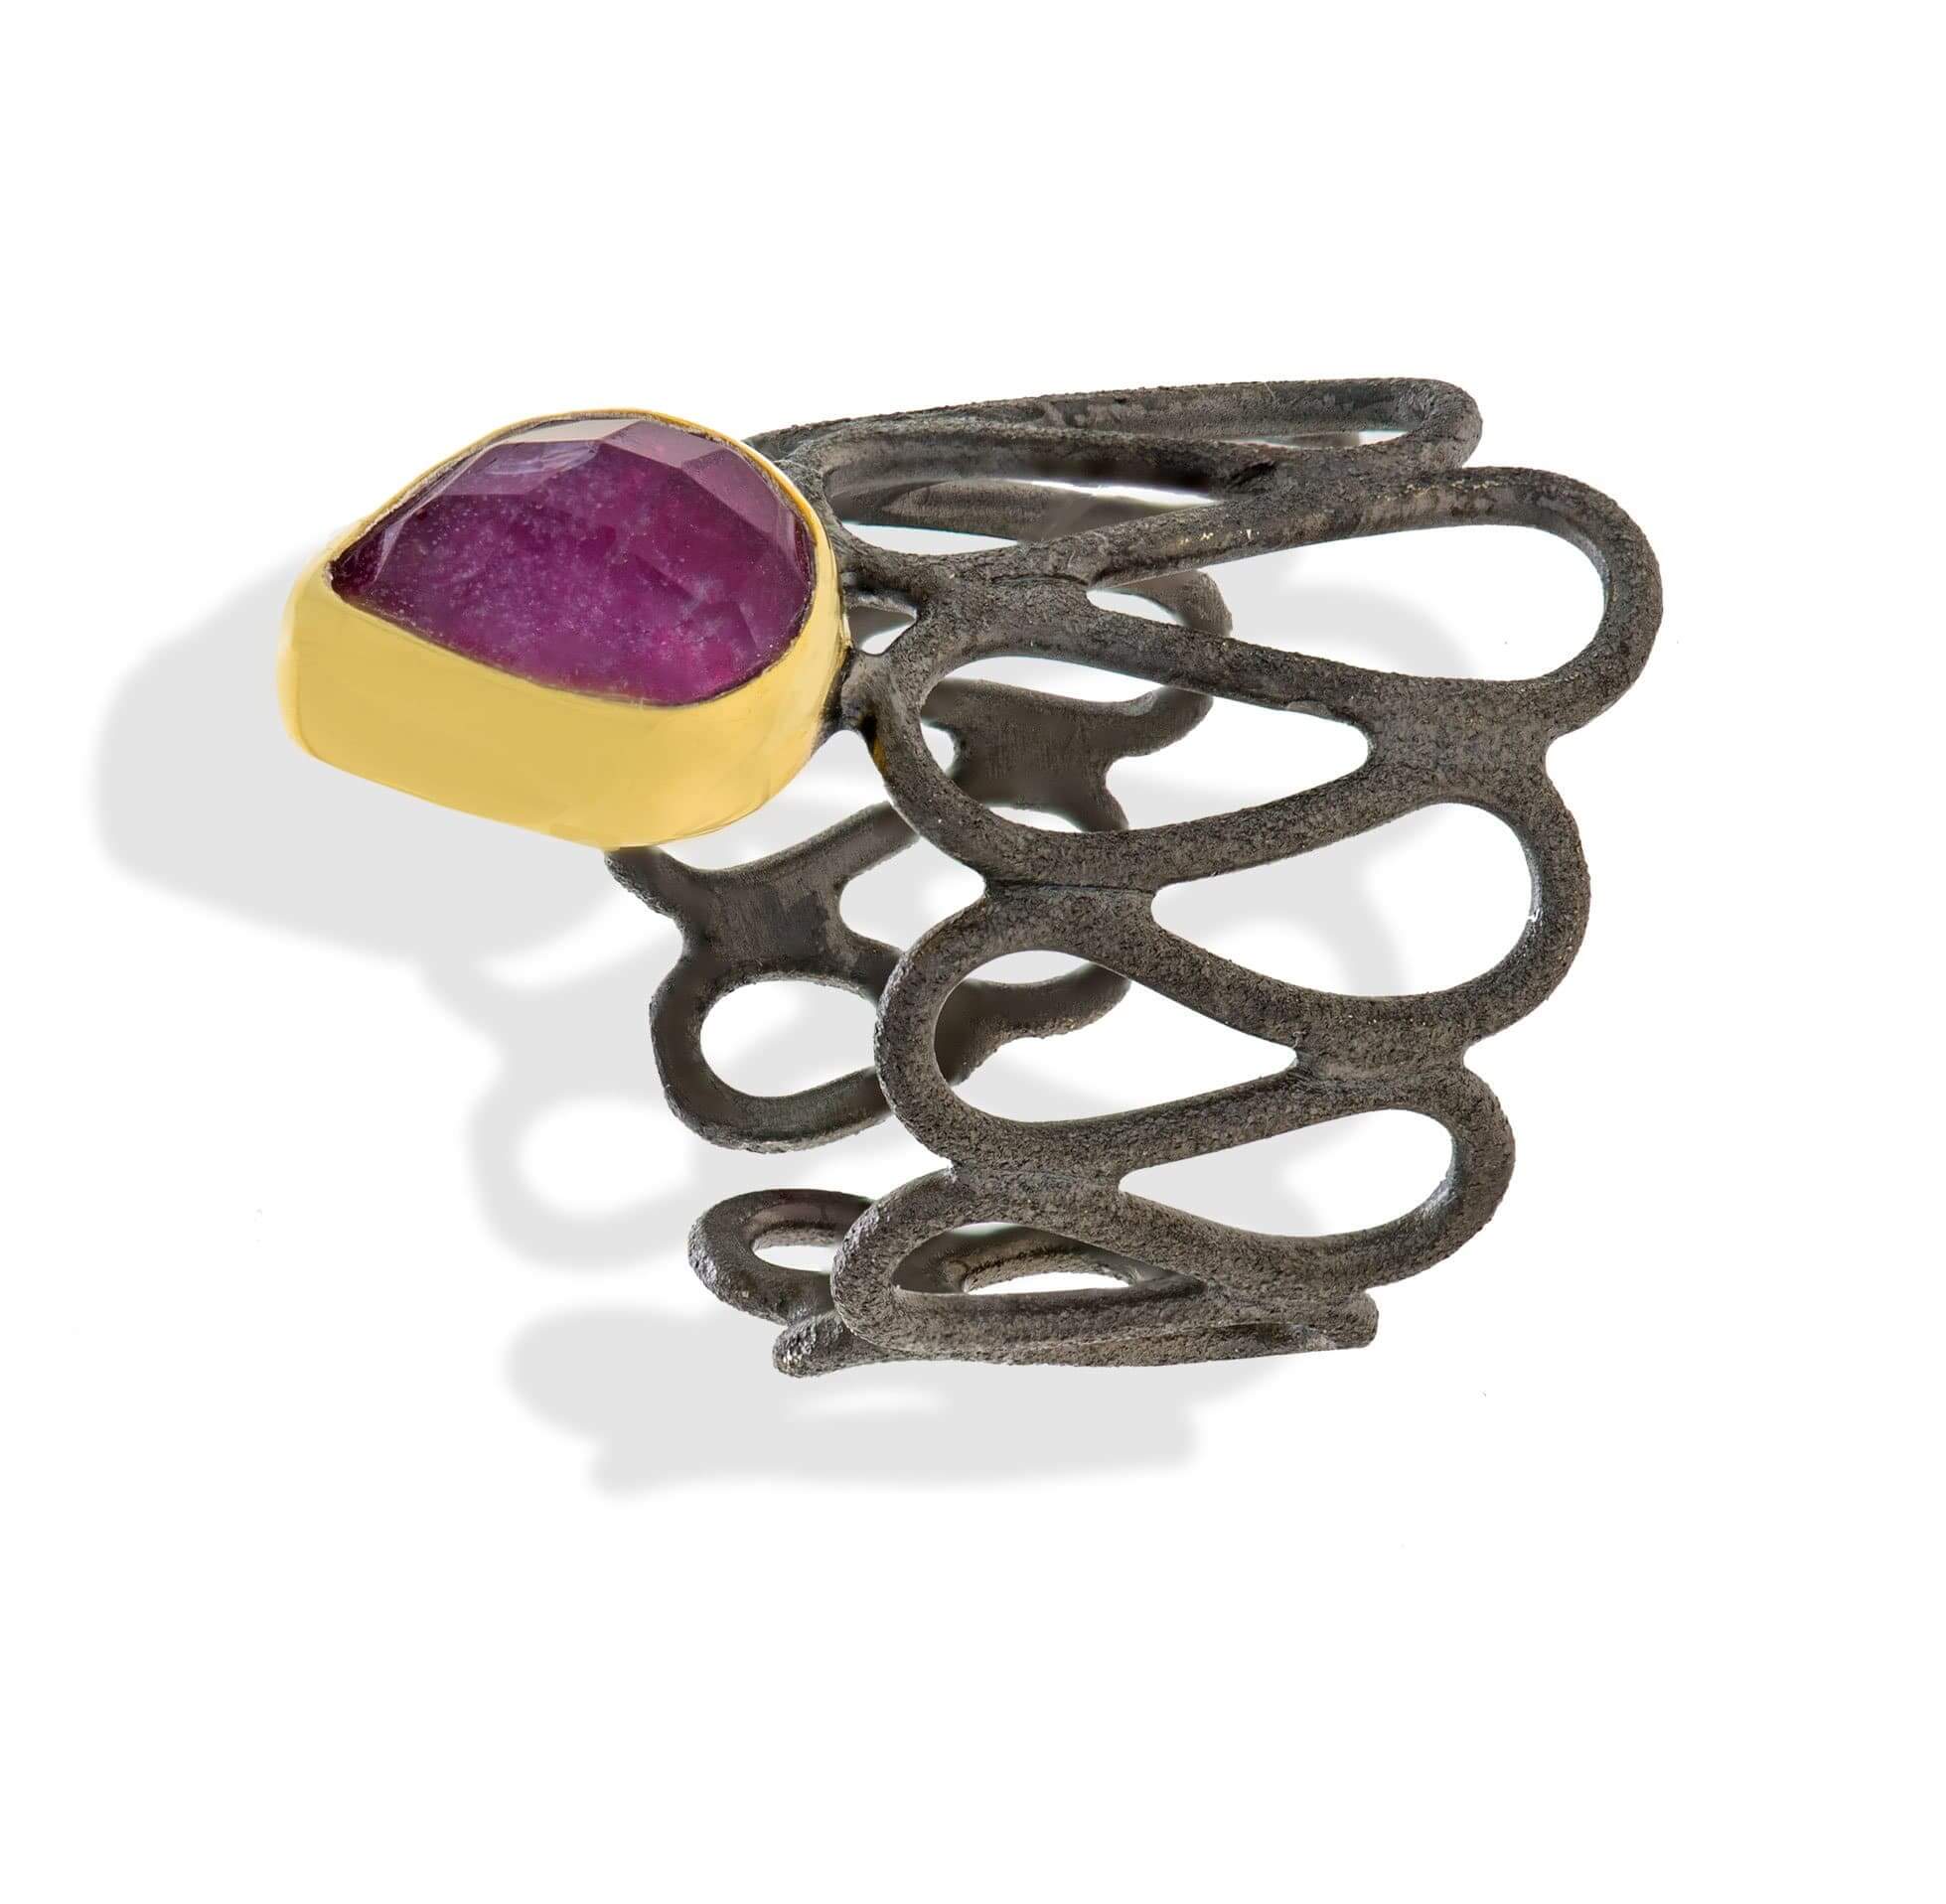 Handmade Black & Gold Plated Silver Ring With A Ruby Quartz Gemstone - Anthos Crafts